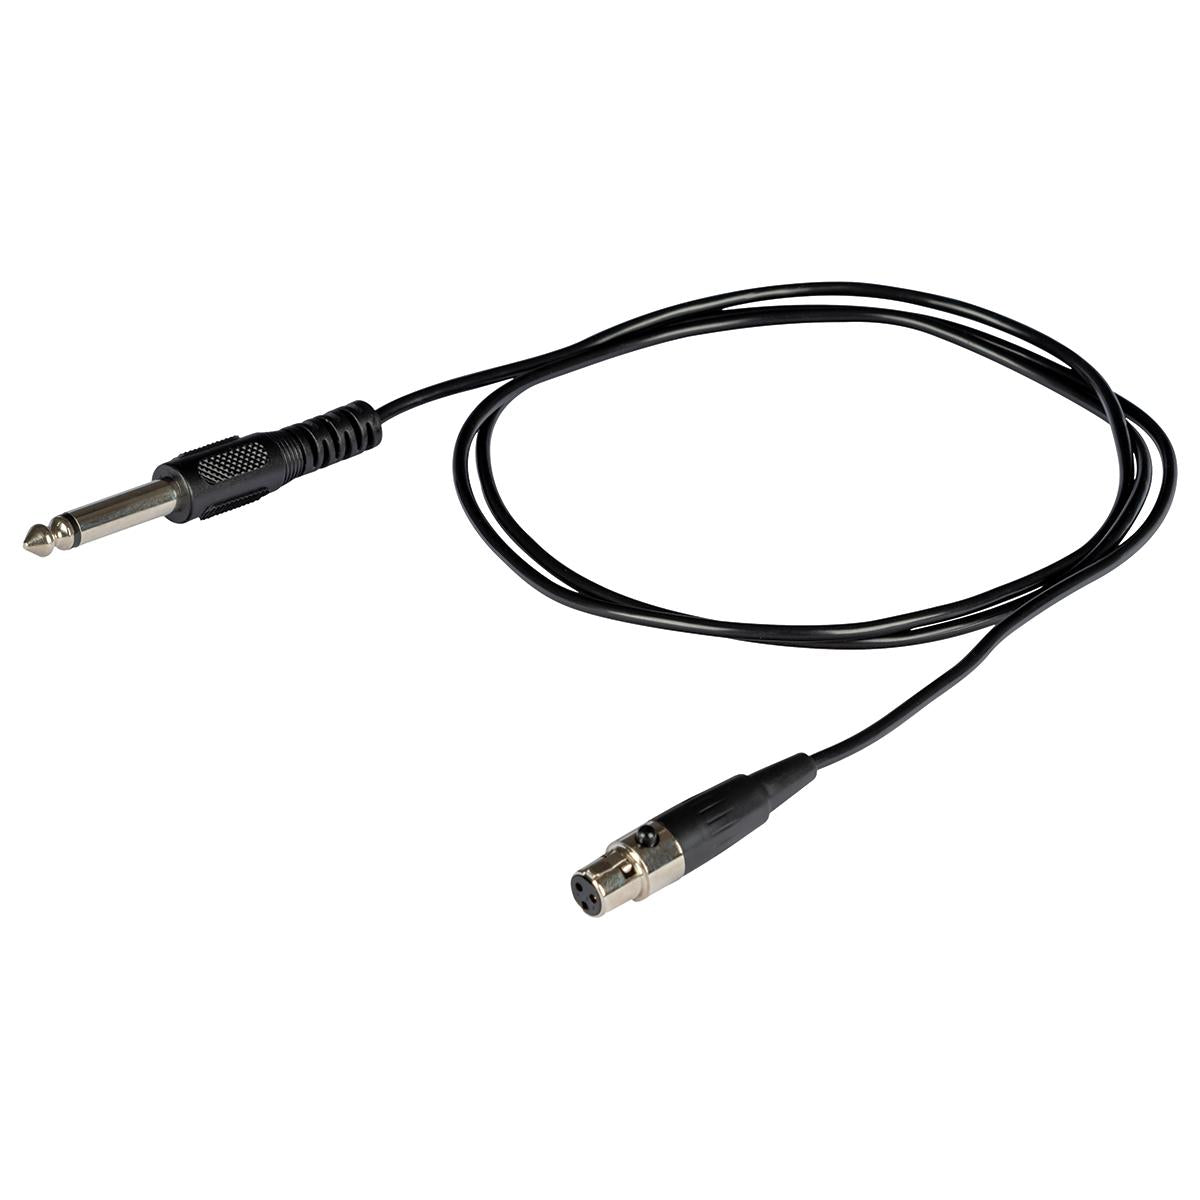 Eikon Aether Guitar Cable For Wireless Bodypack Systems Mini XLR to 1/4 Jack